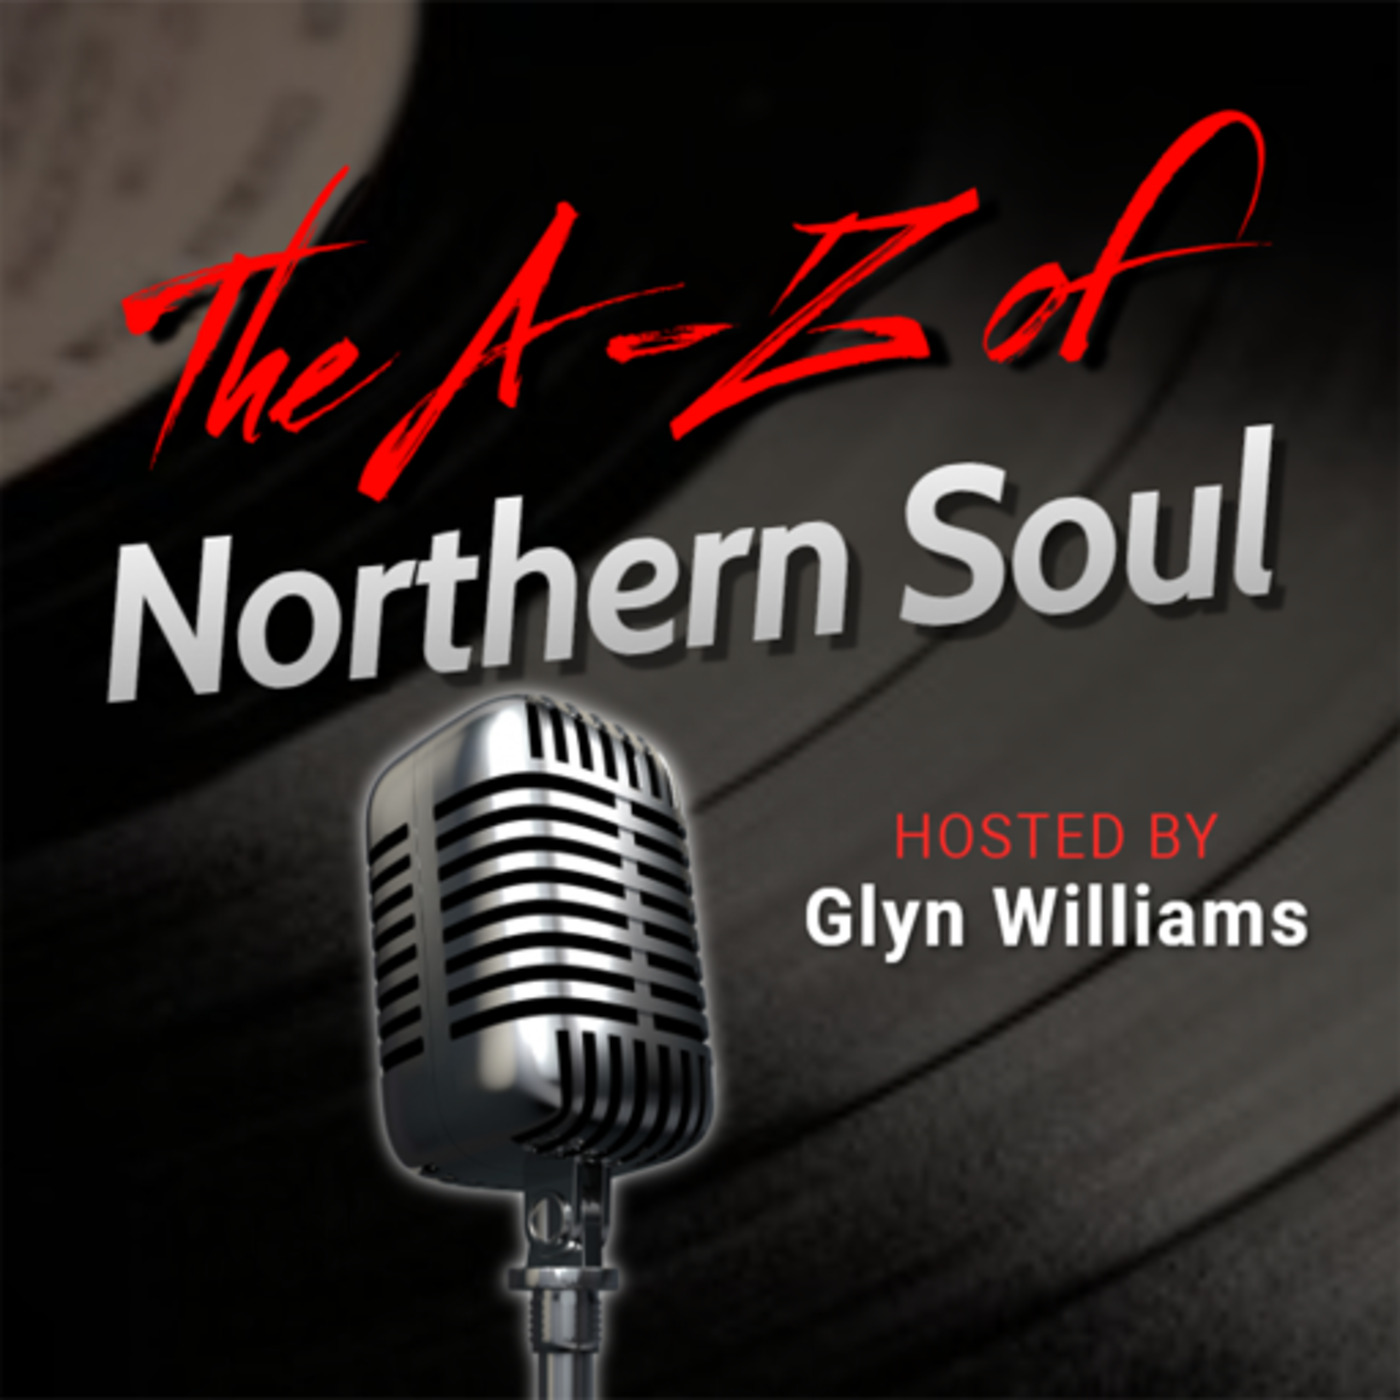 The A-Z of Northern Soul E043